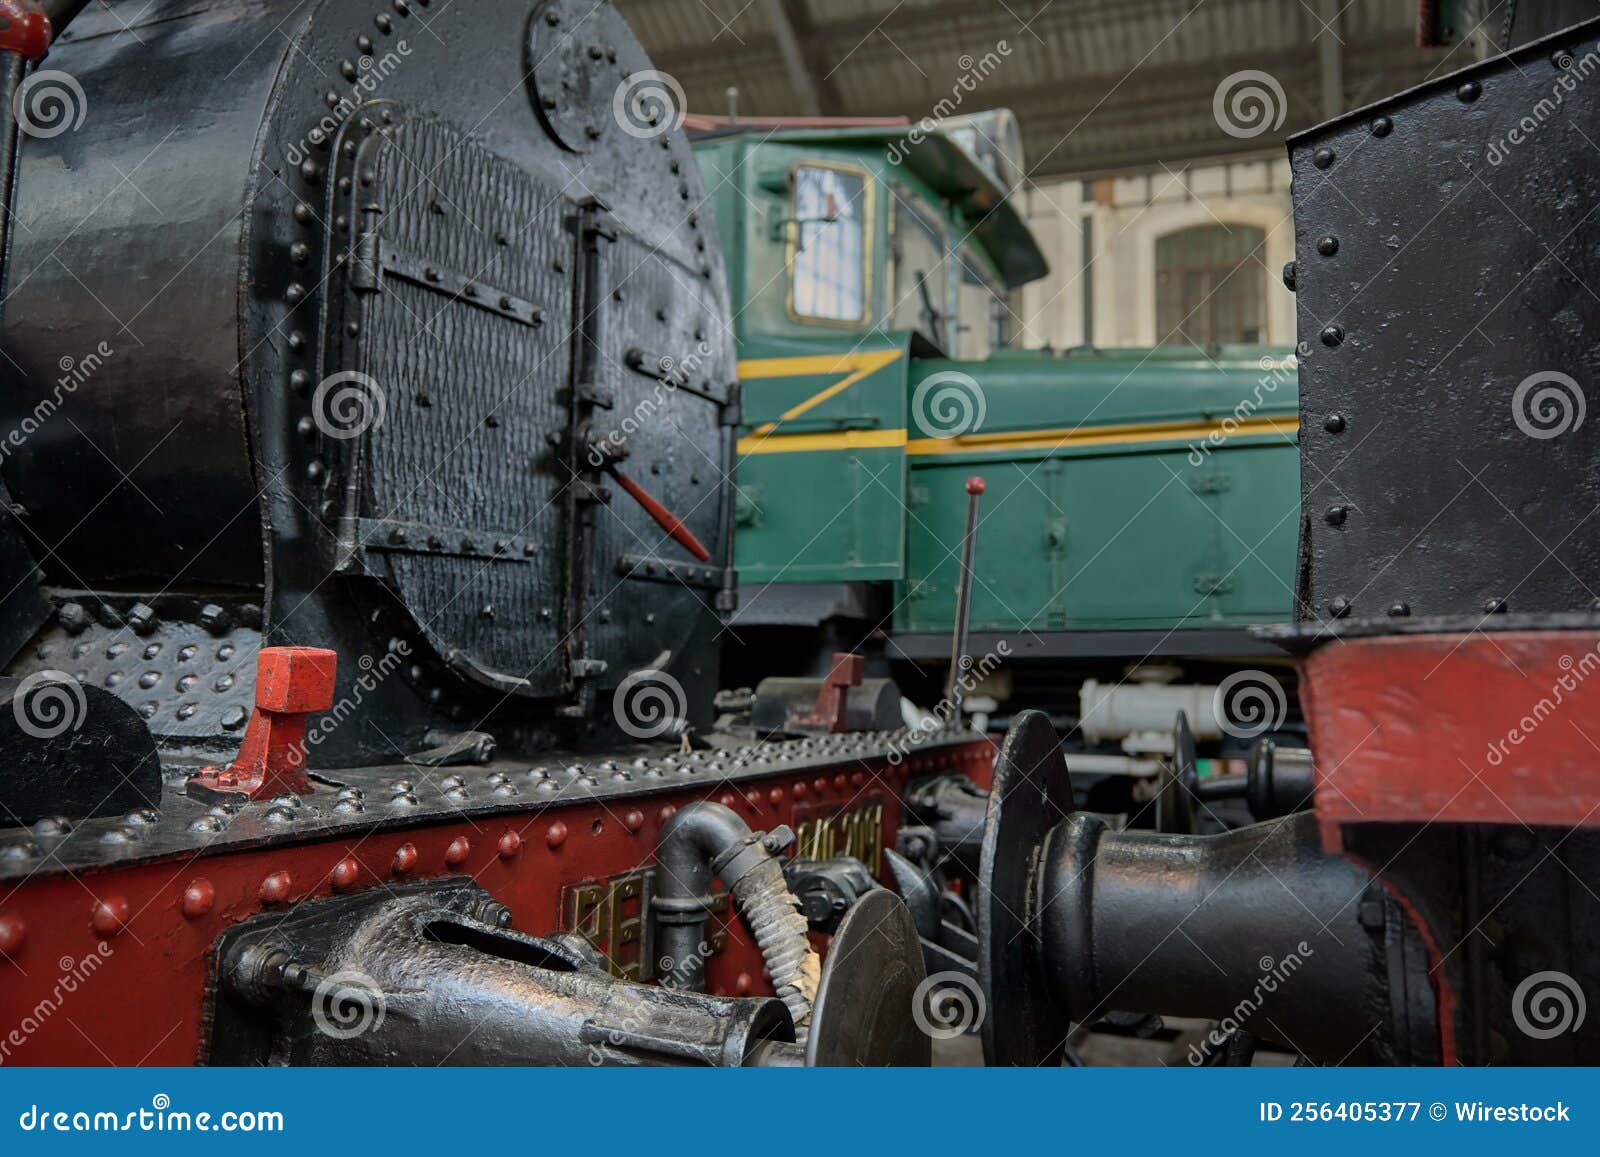 old spanish steam locomotive at delicias station in madrid, spain